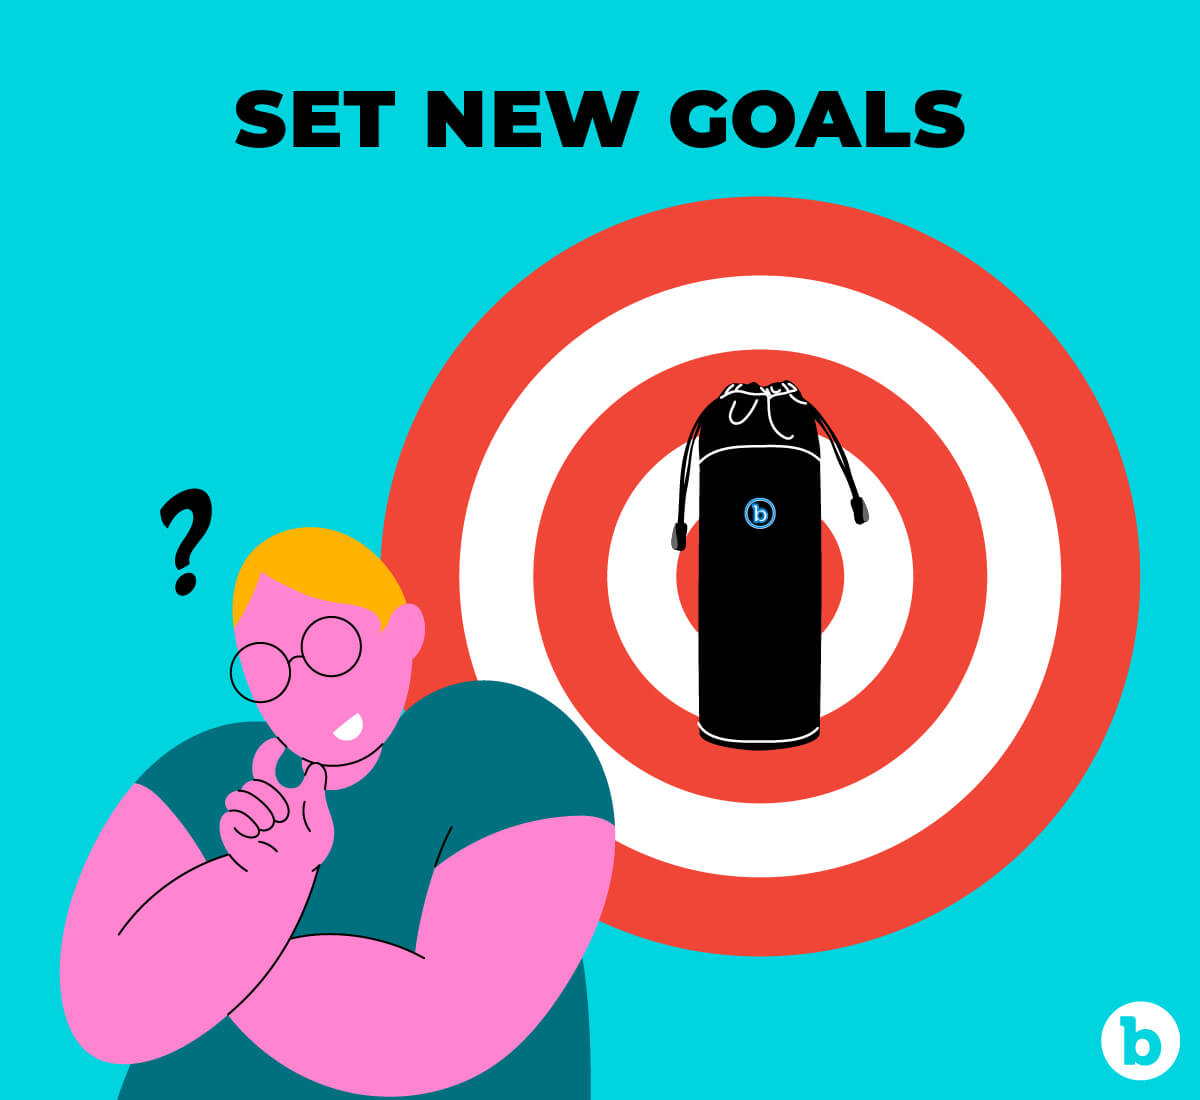 Set yourself new anal play goals in 2021